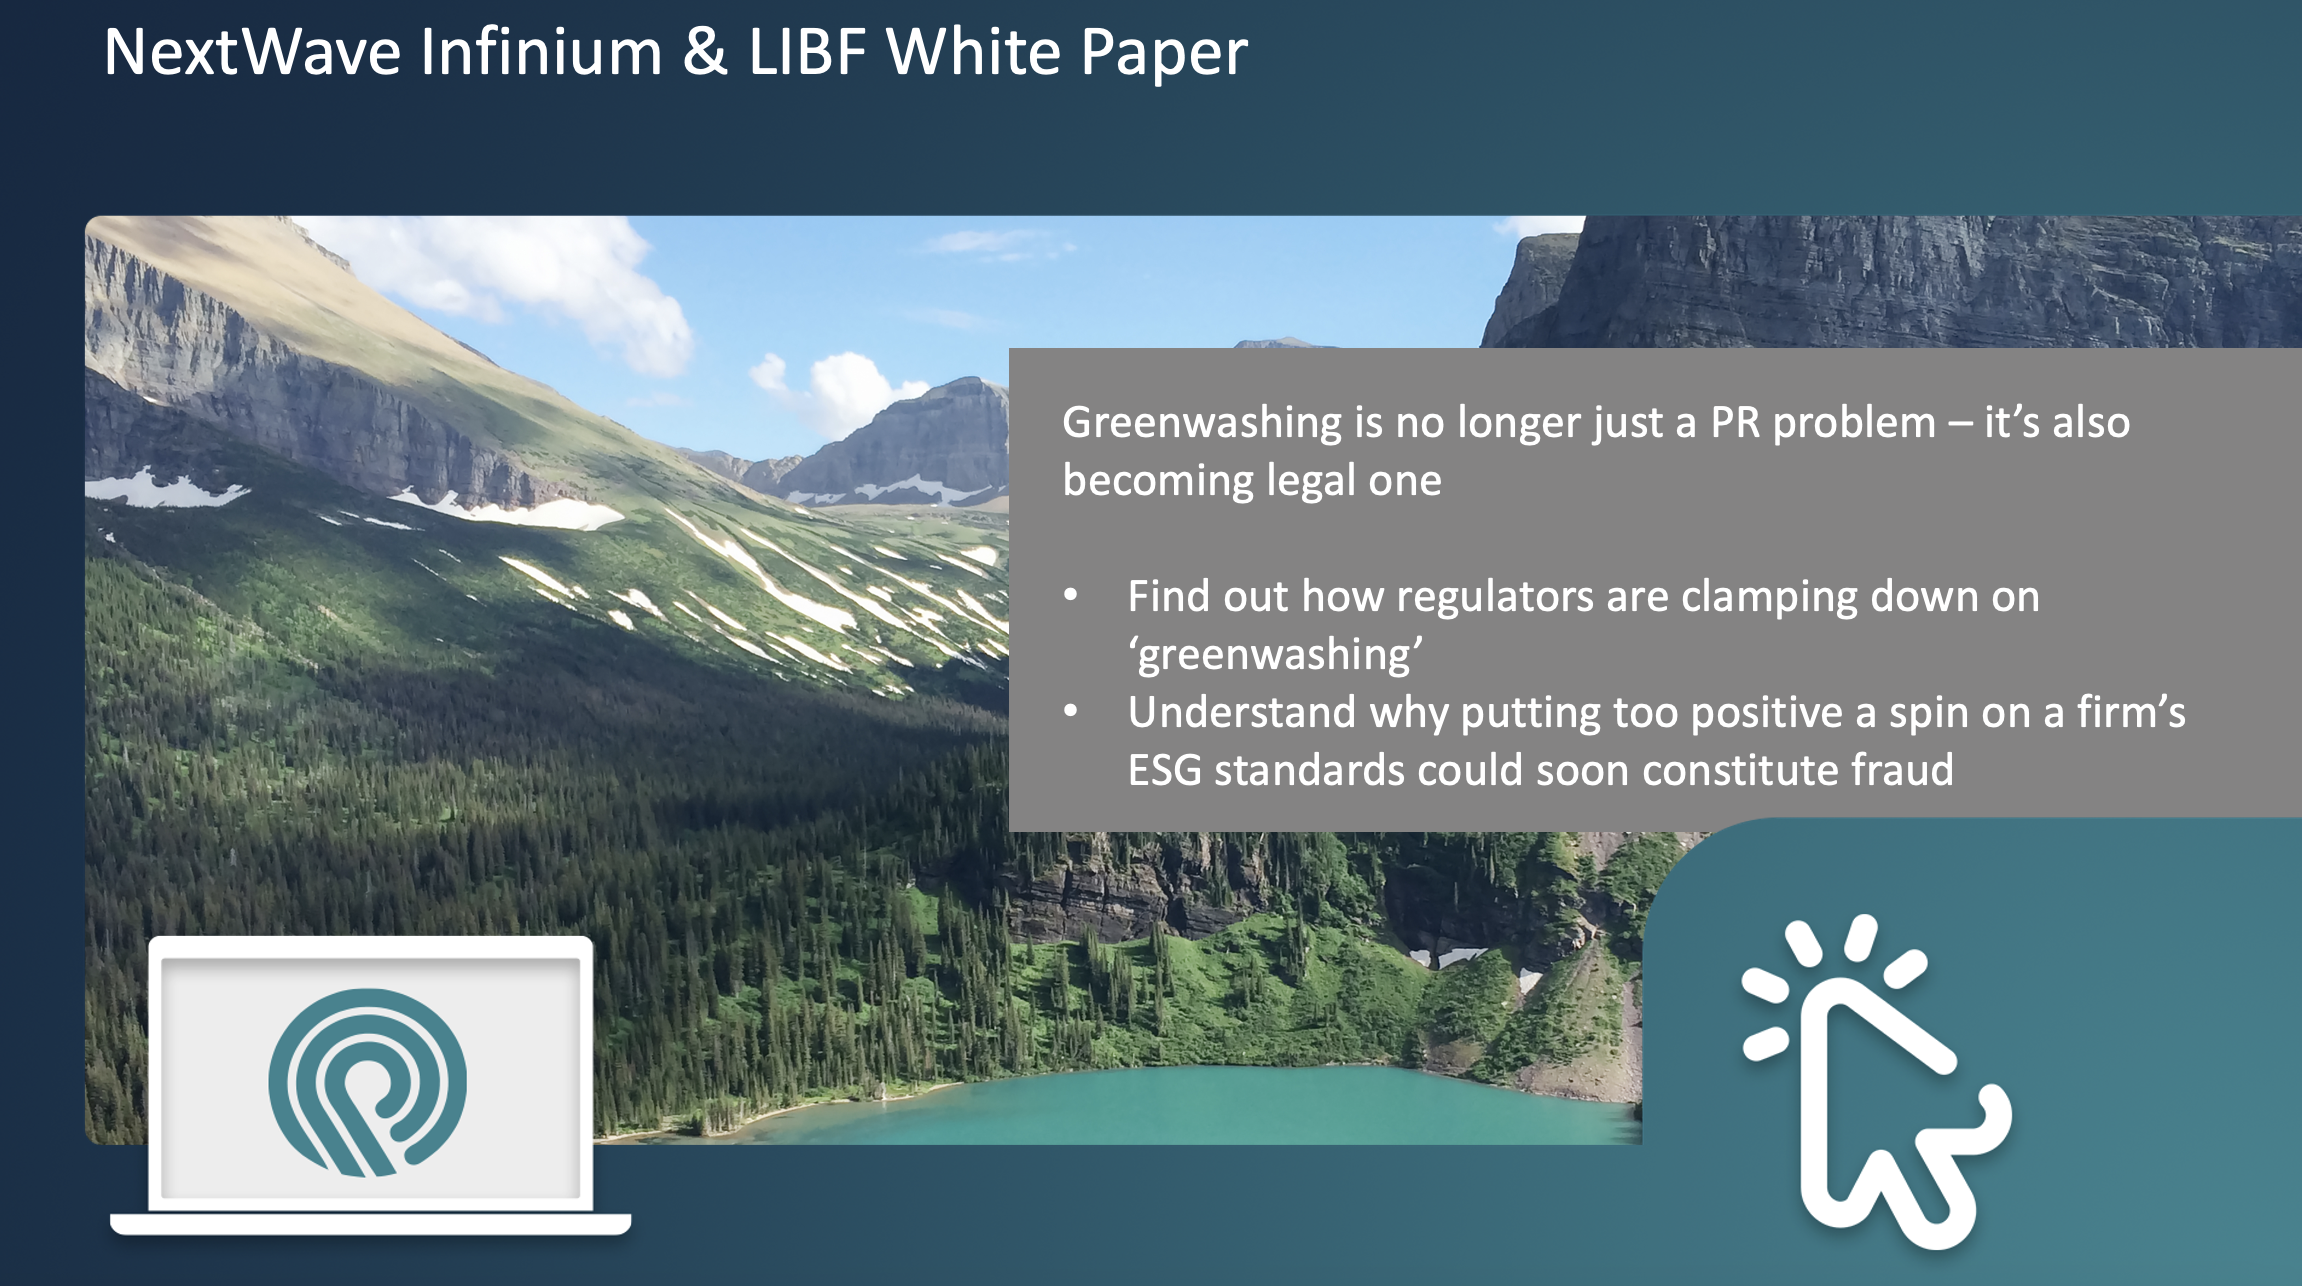 NextWave Infinium & LIBF White Paper – Greenwashing is no longer just a PR problem – it’s also becoming legal one